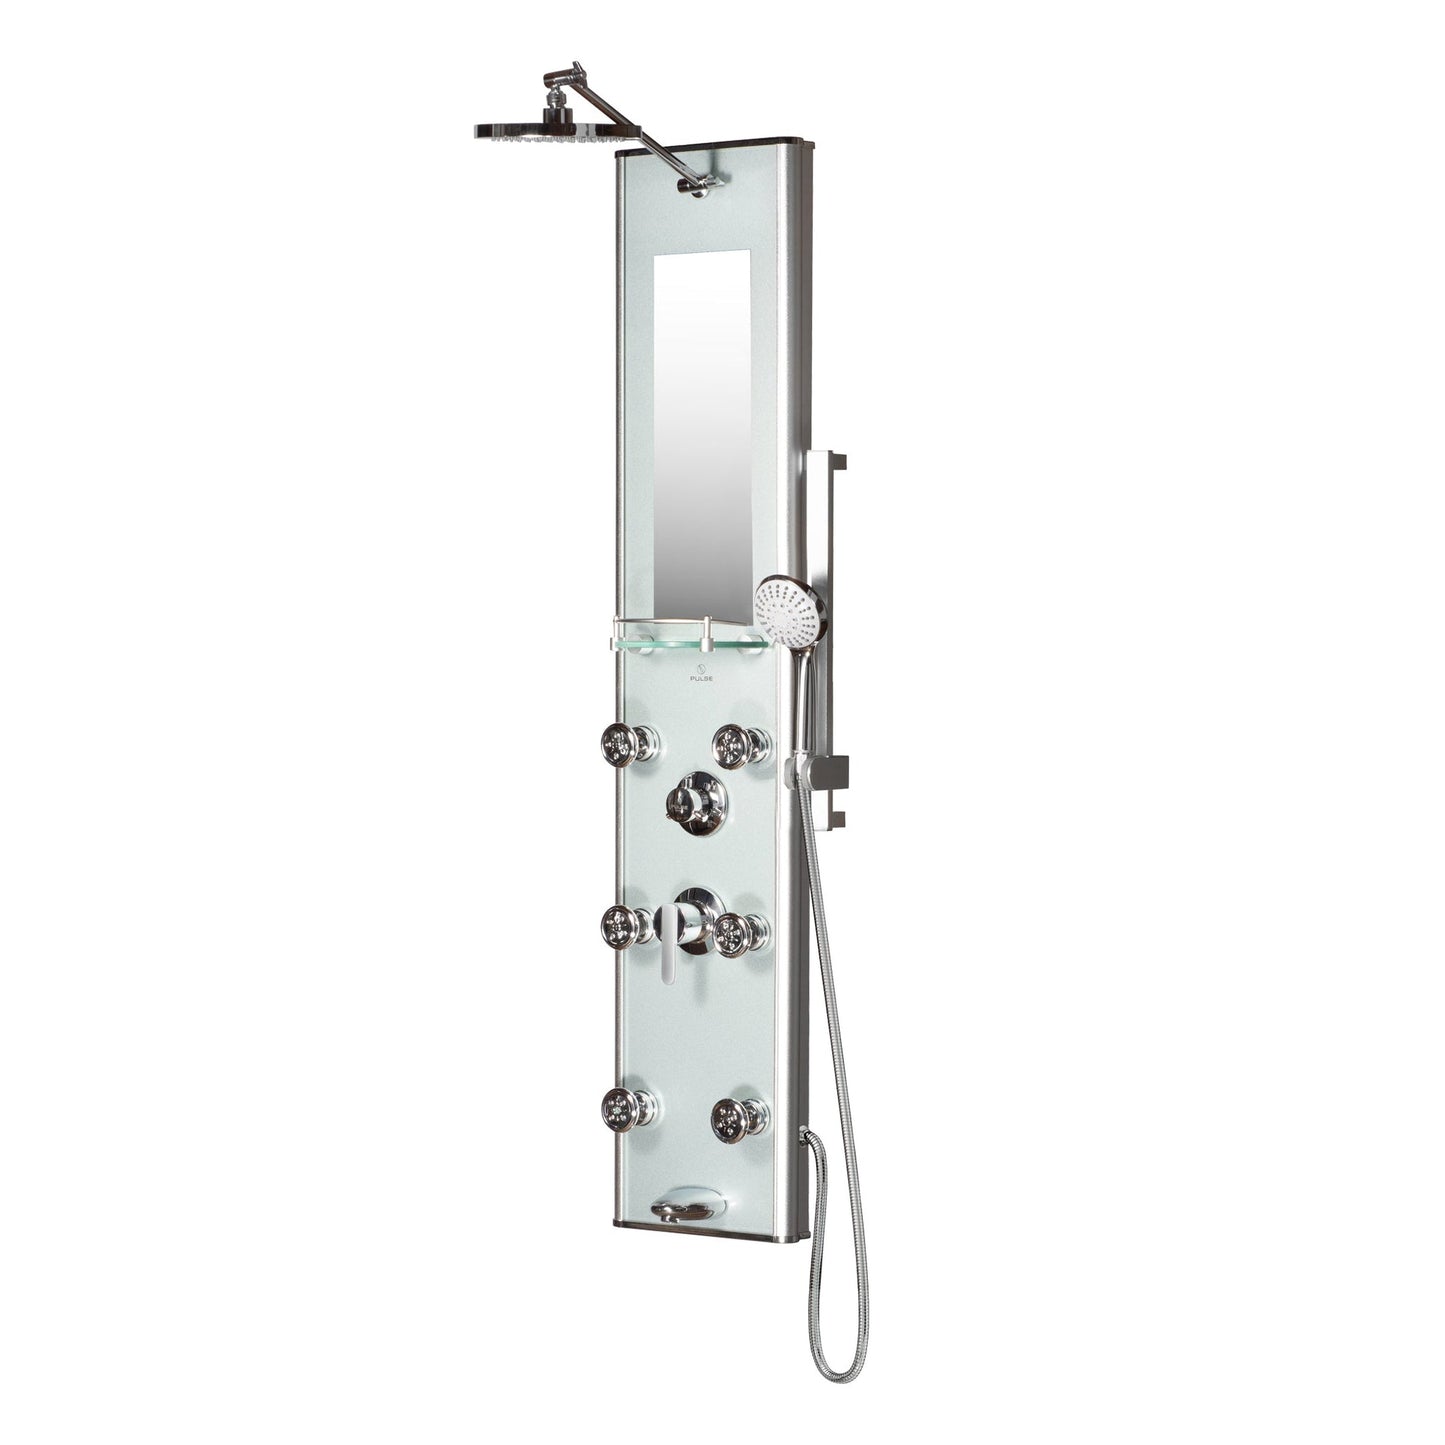 PULSE ShowerSpas Kihei II 54" Rain Shower Panel in Silver Glass Chrome Finish With 6-Body Jet and Multi Function Hand Shower